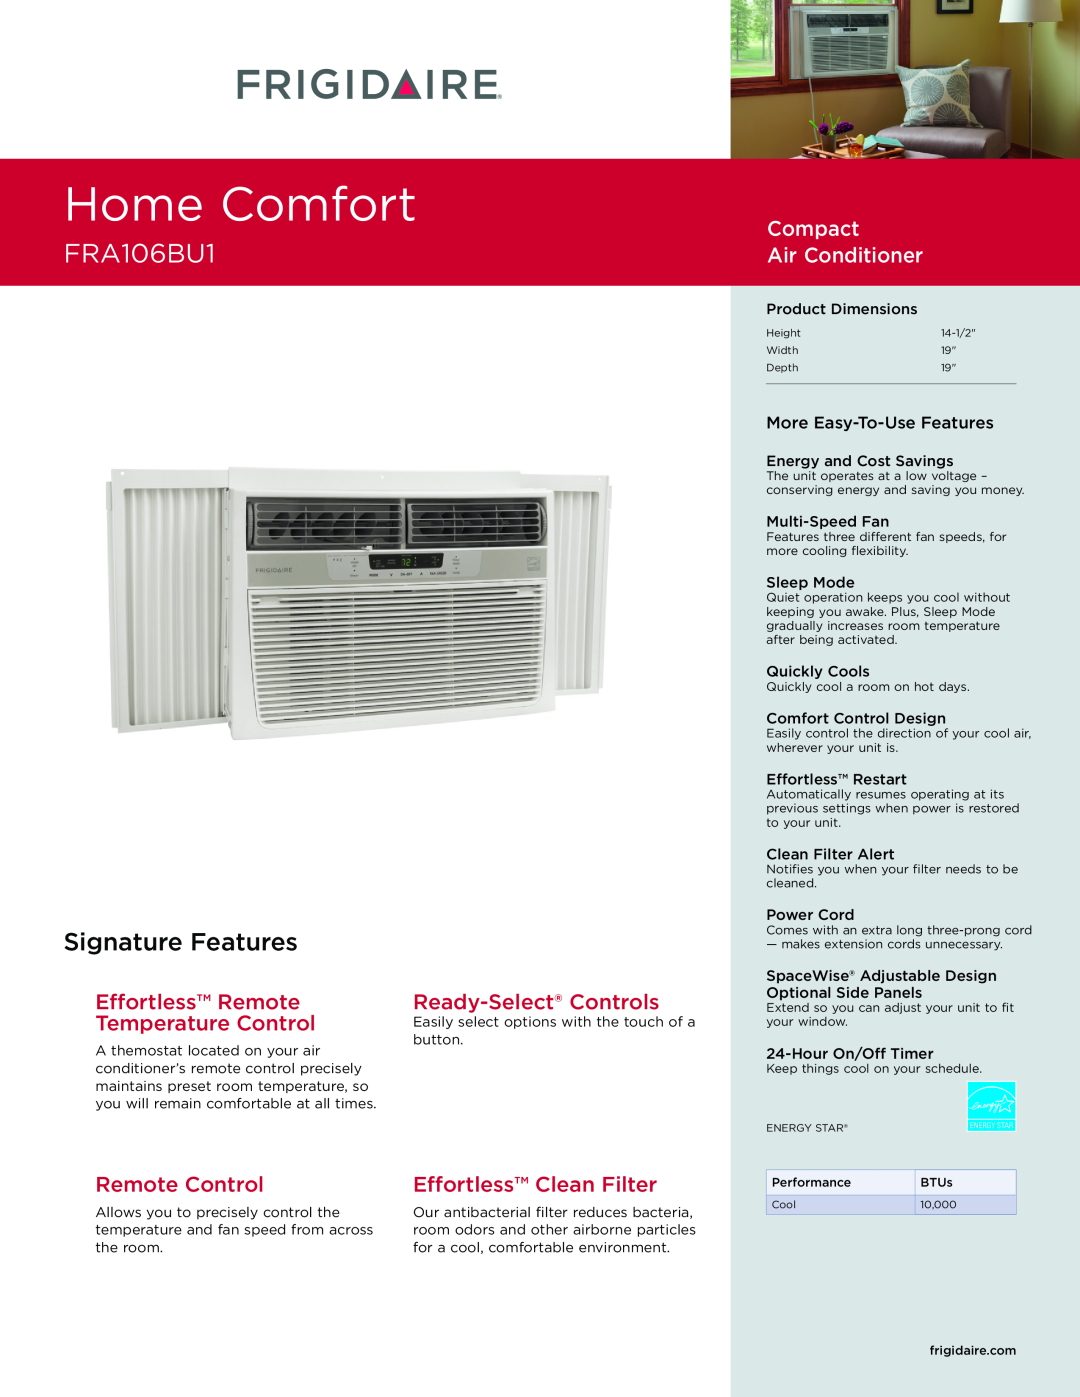 Frigidaire FRA106BU1 dimensions Home Comfort, Signature Features, Compact Air Conditioner , Ready-Select Controls 